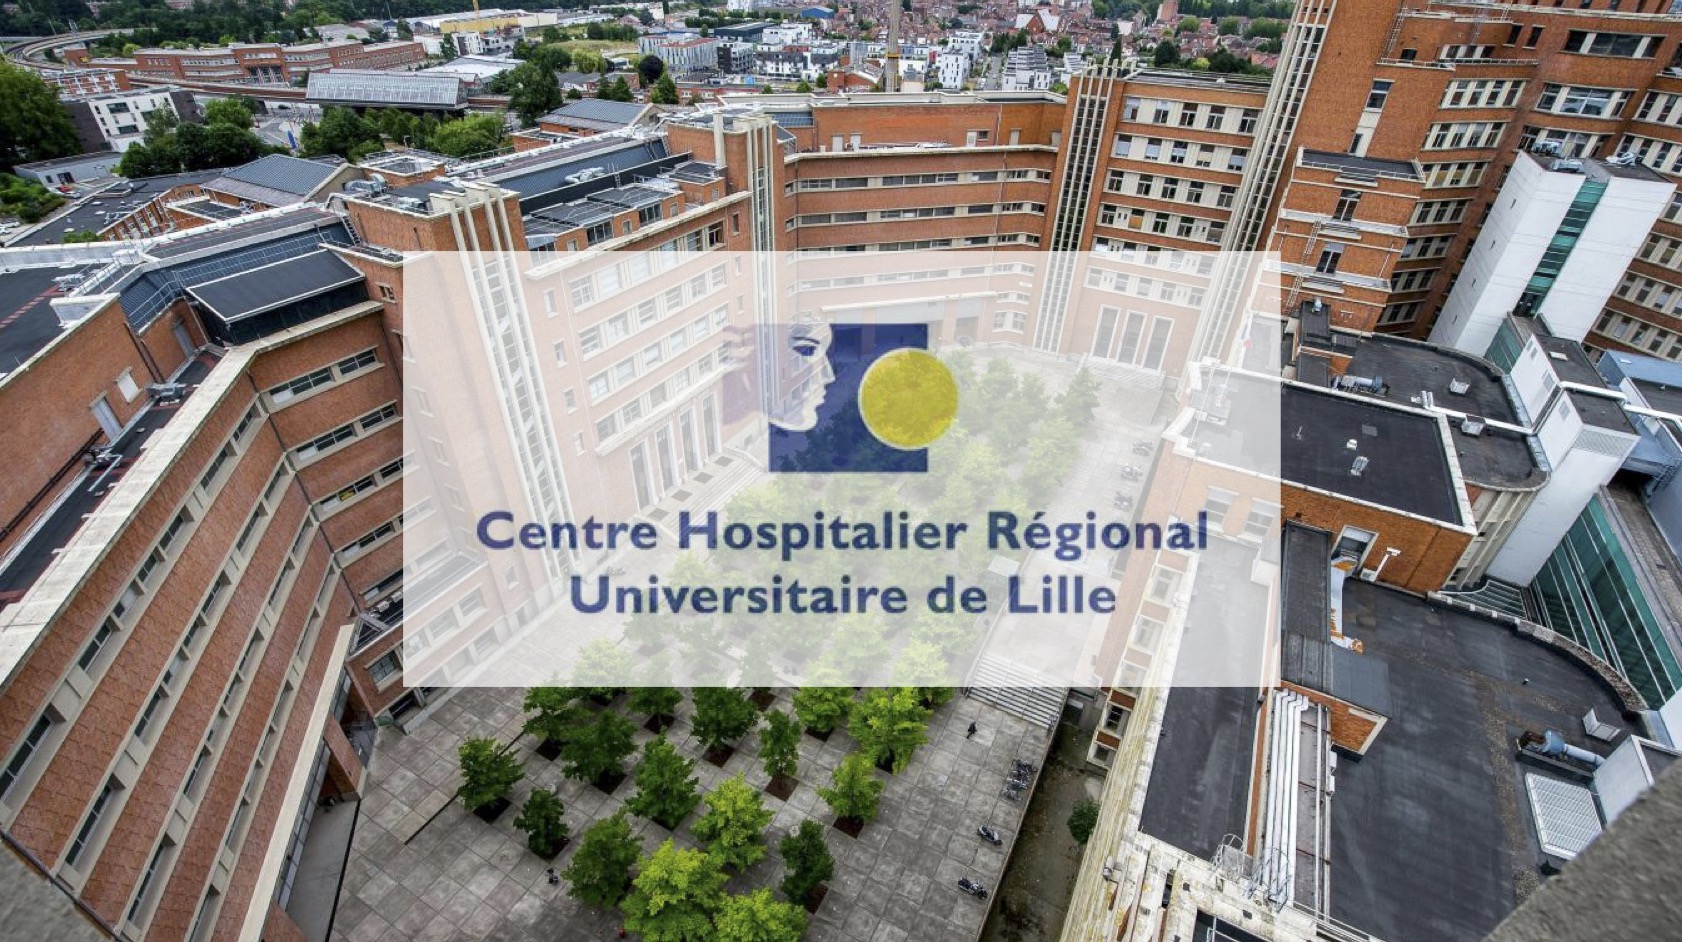 Lille University Hospital uses ultra-innovative technology: the very high-speed sequencer.